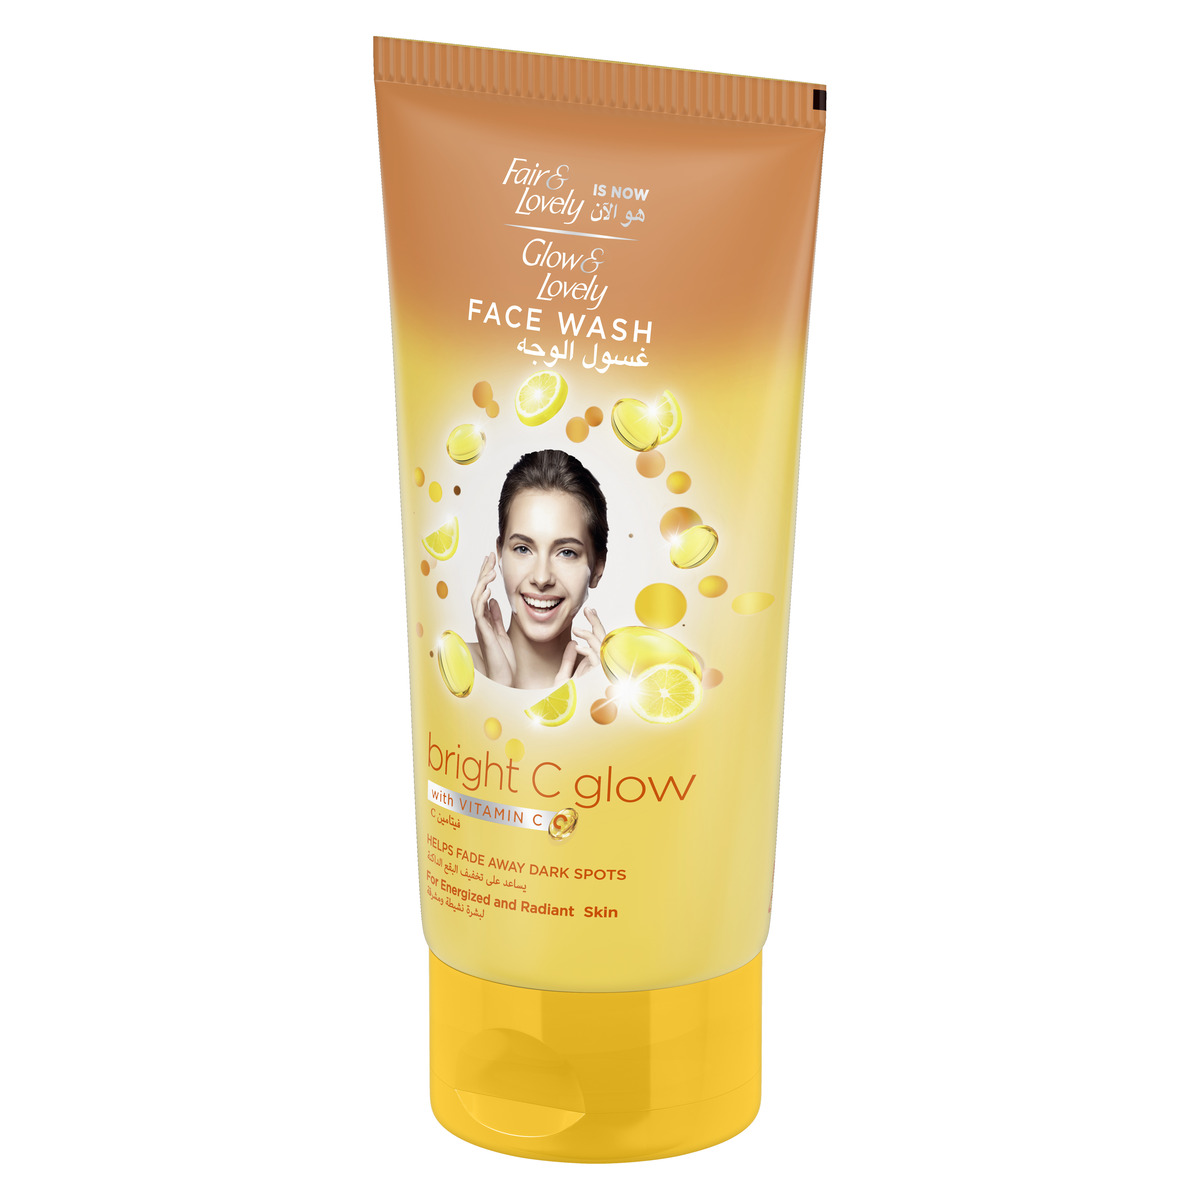 Glow & Lovely Bright C Glow Face Wash, 150 g